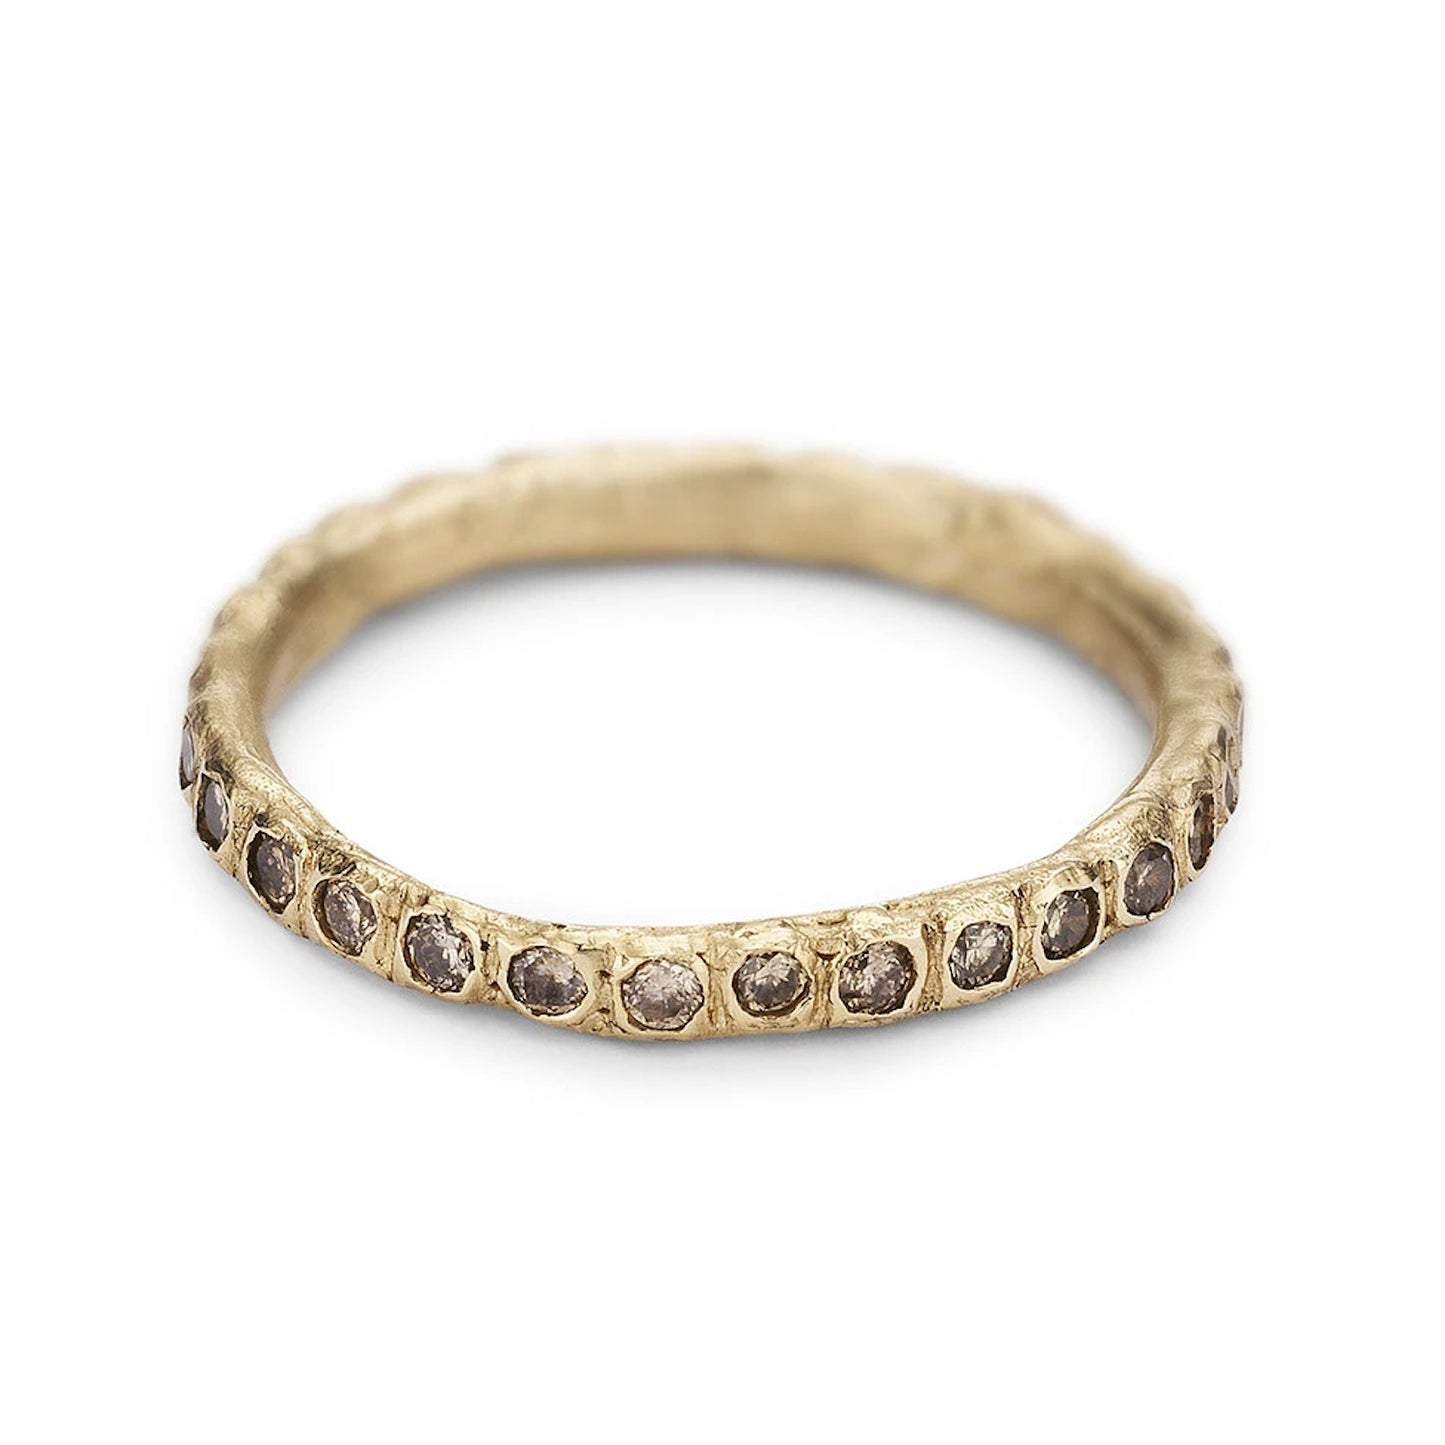 14ct yellow gold Ruth Tomlinson Champagne Diamond eternity band. Organic eternity band. Organic diamond ring.